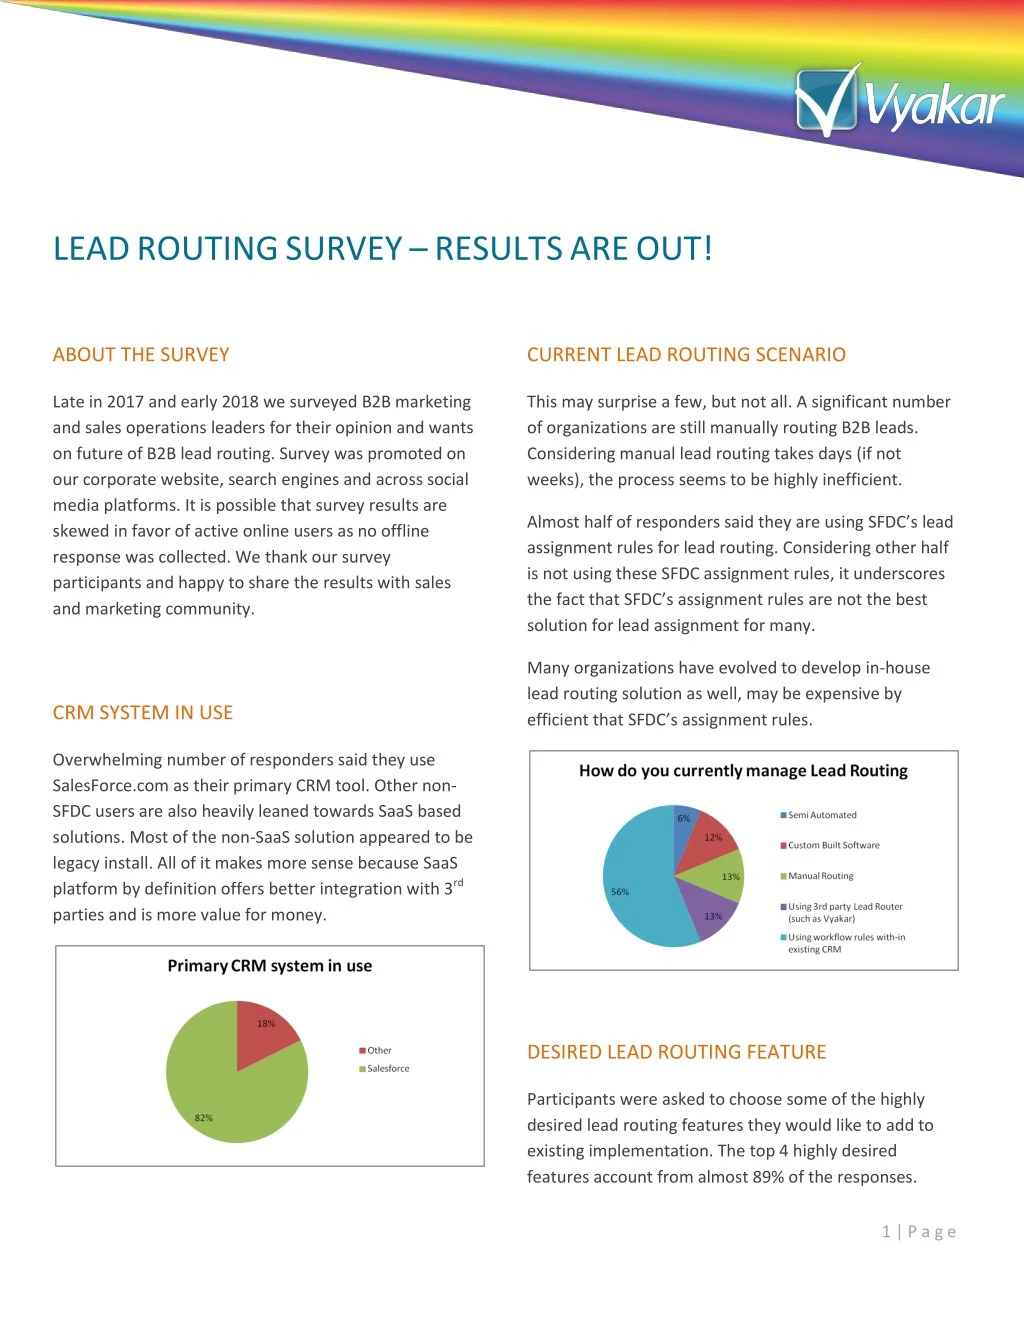 lead routing survey results are out